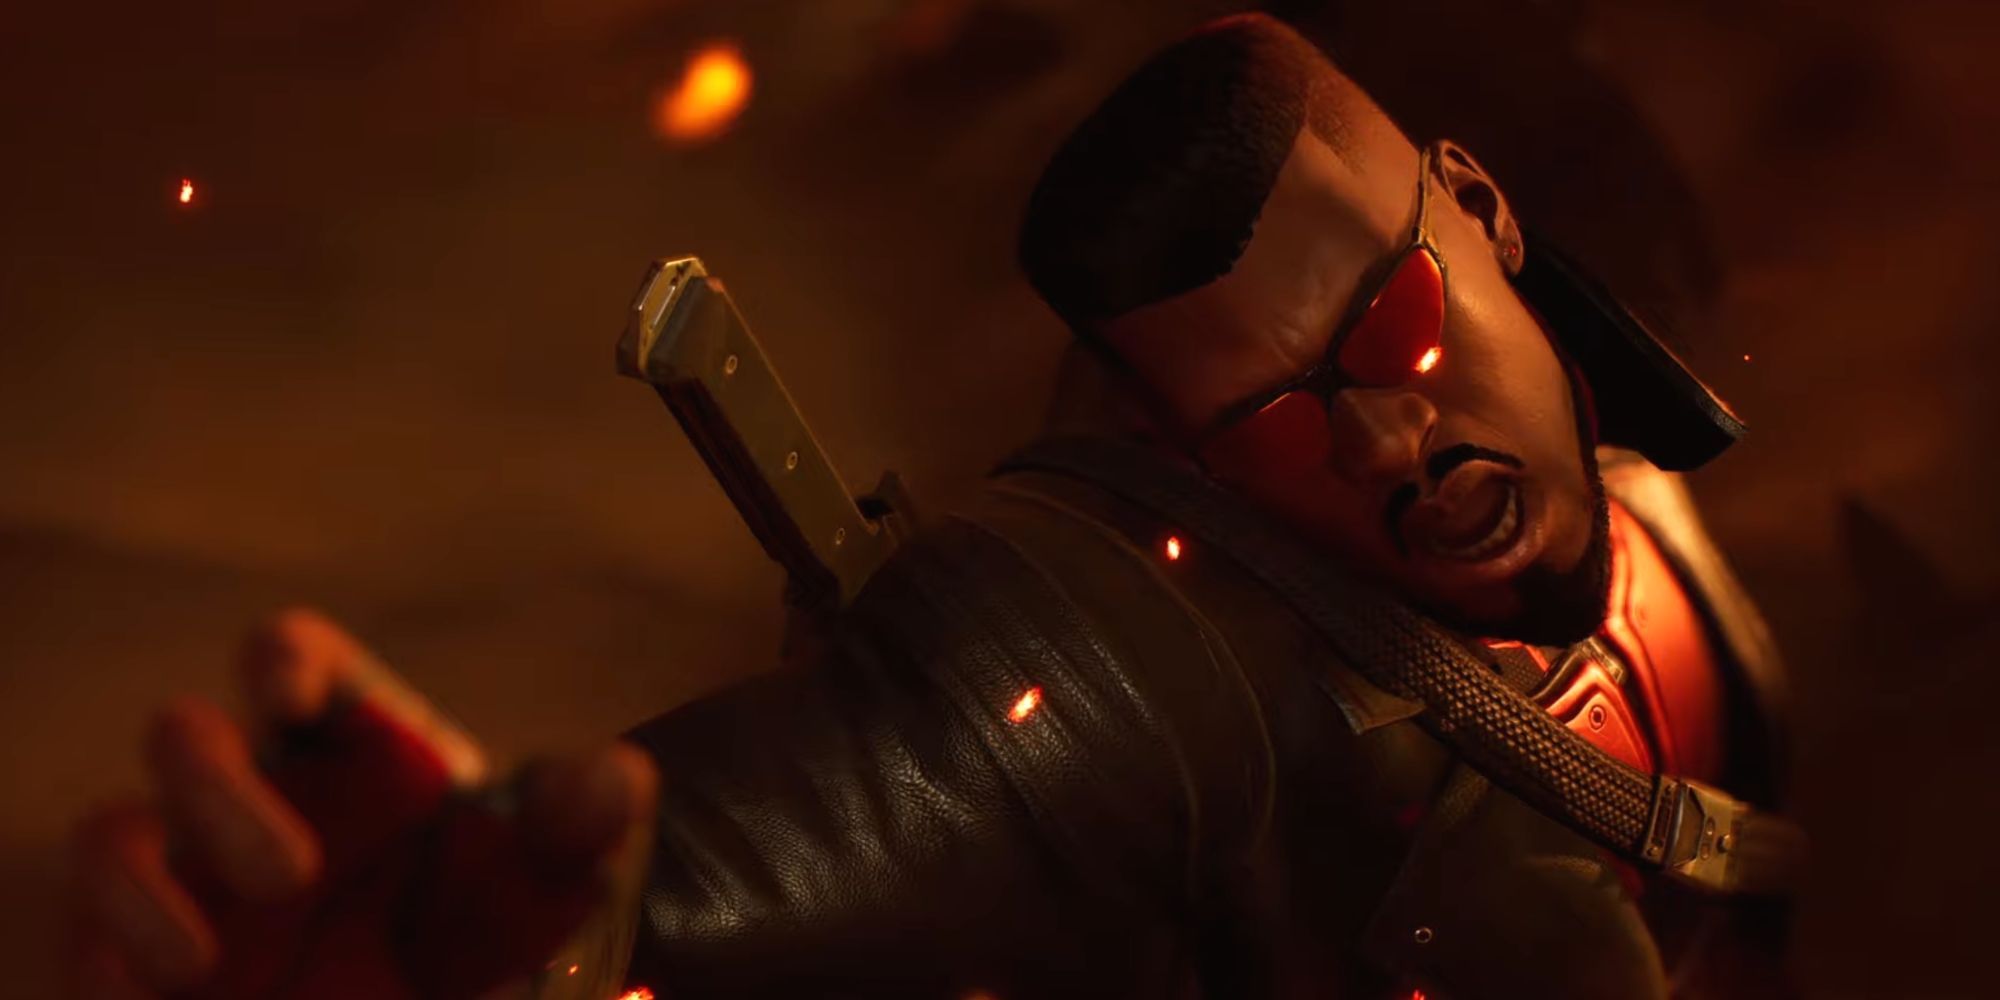 Blade using his "Glaive" ability. A close-up shot of Blade looking determined, and about to strike an enemy.